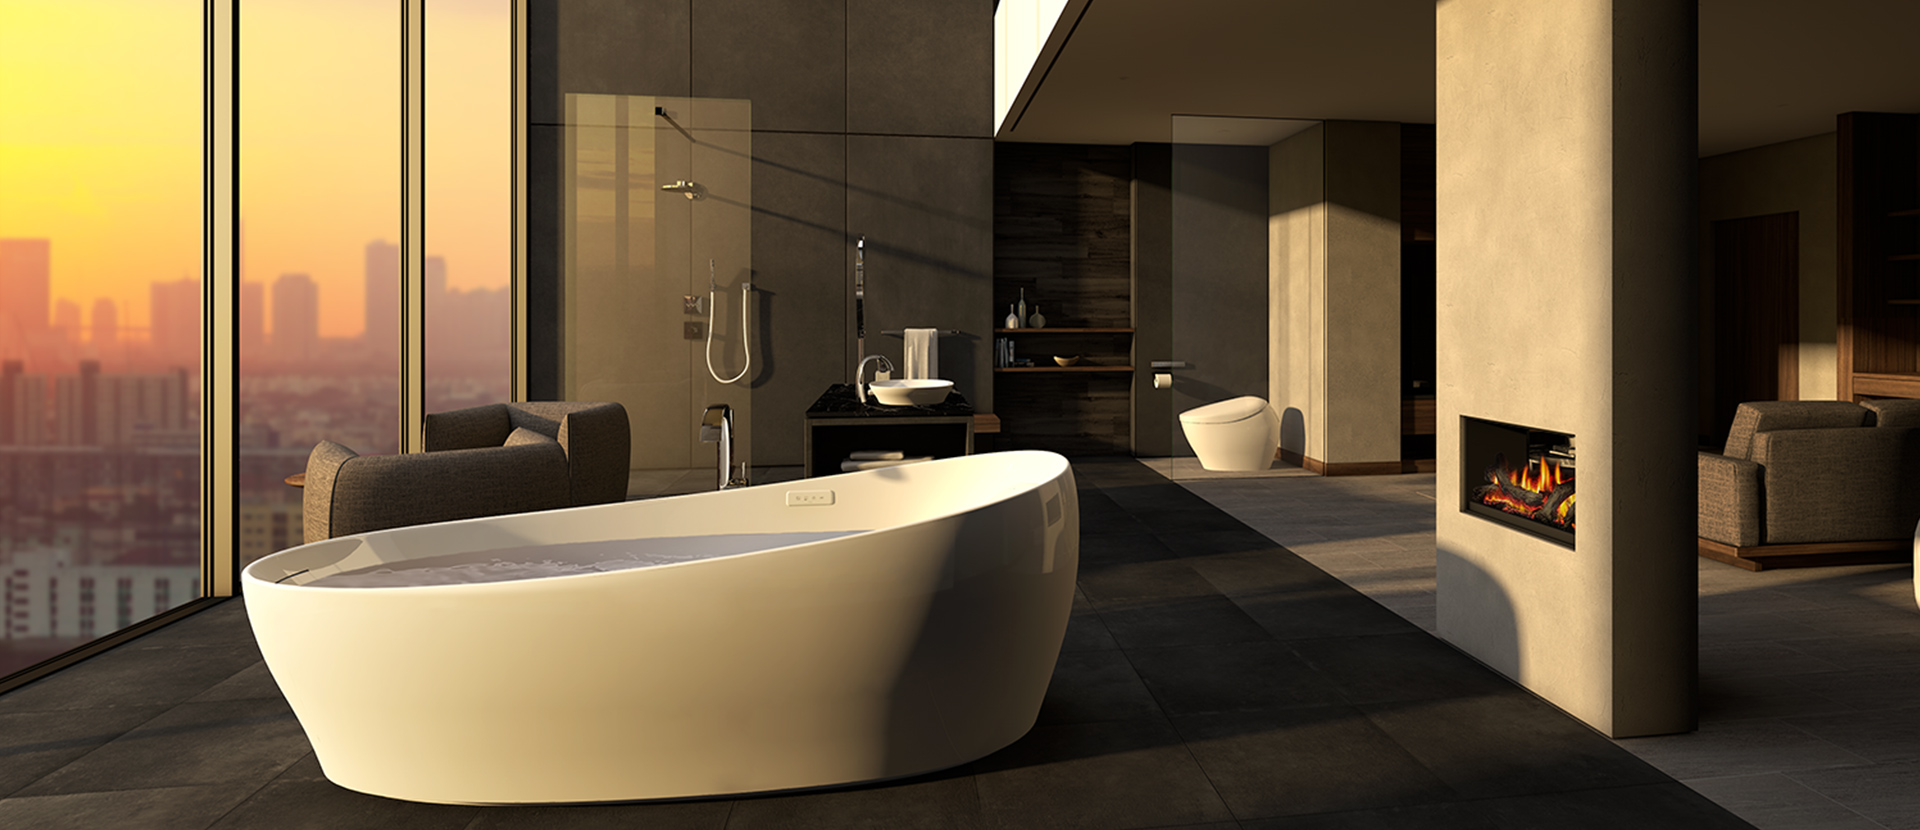 Photo of a large bathroom interior of high rise over a city. Showing TOTO's Flotation Tub.